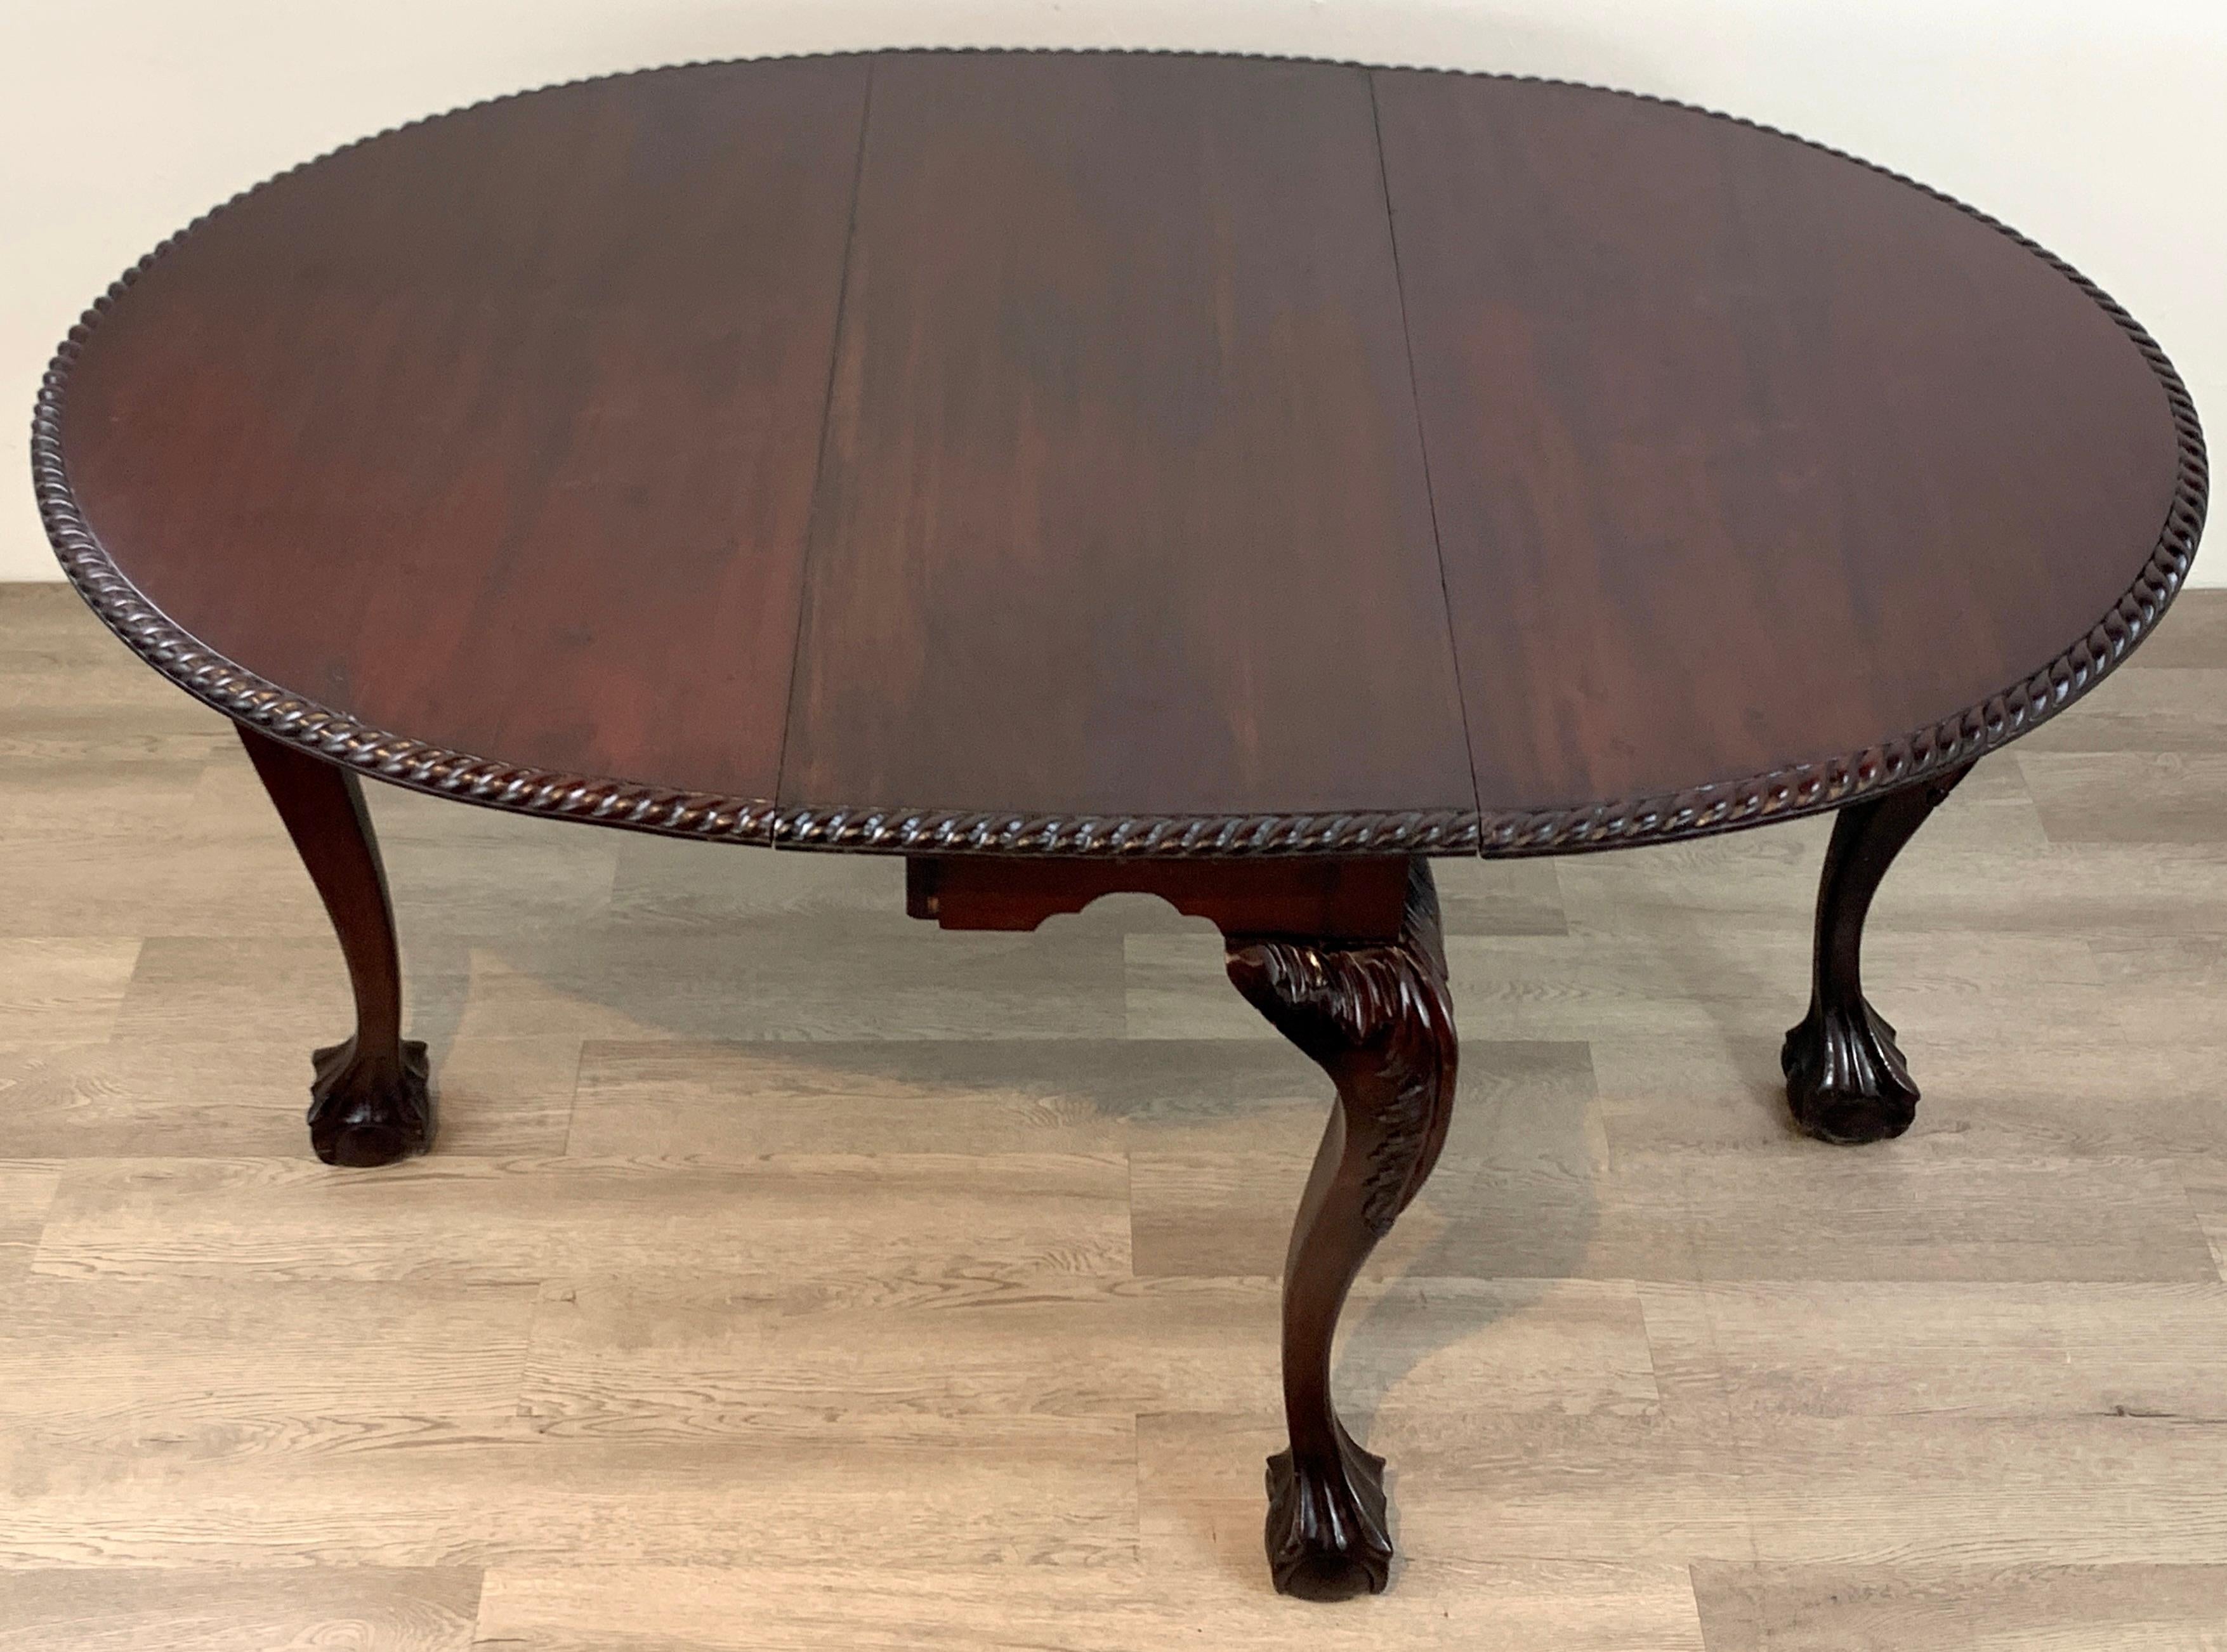 19th Century English Mahogany Ball & Claw Foot Tuck Away Dining Room Table For Sale 5